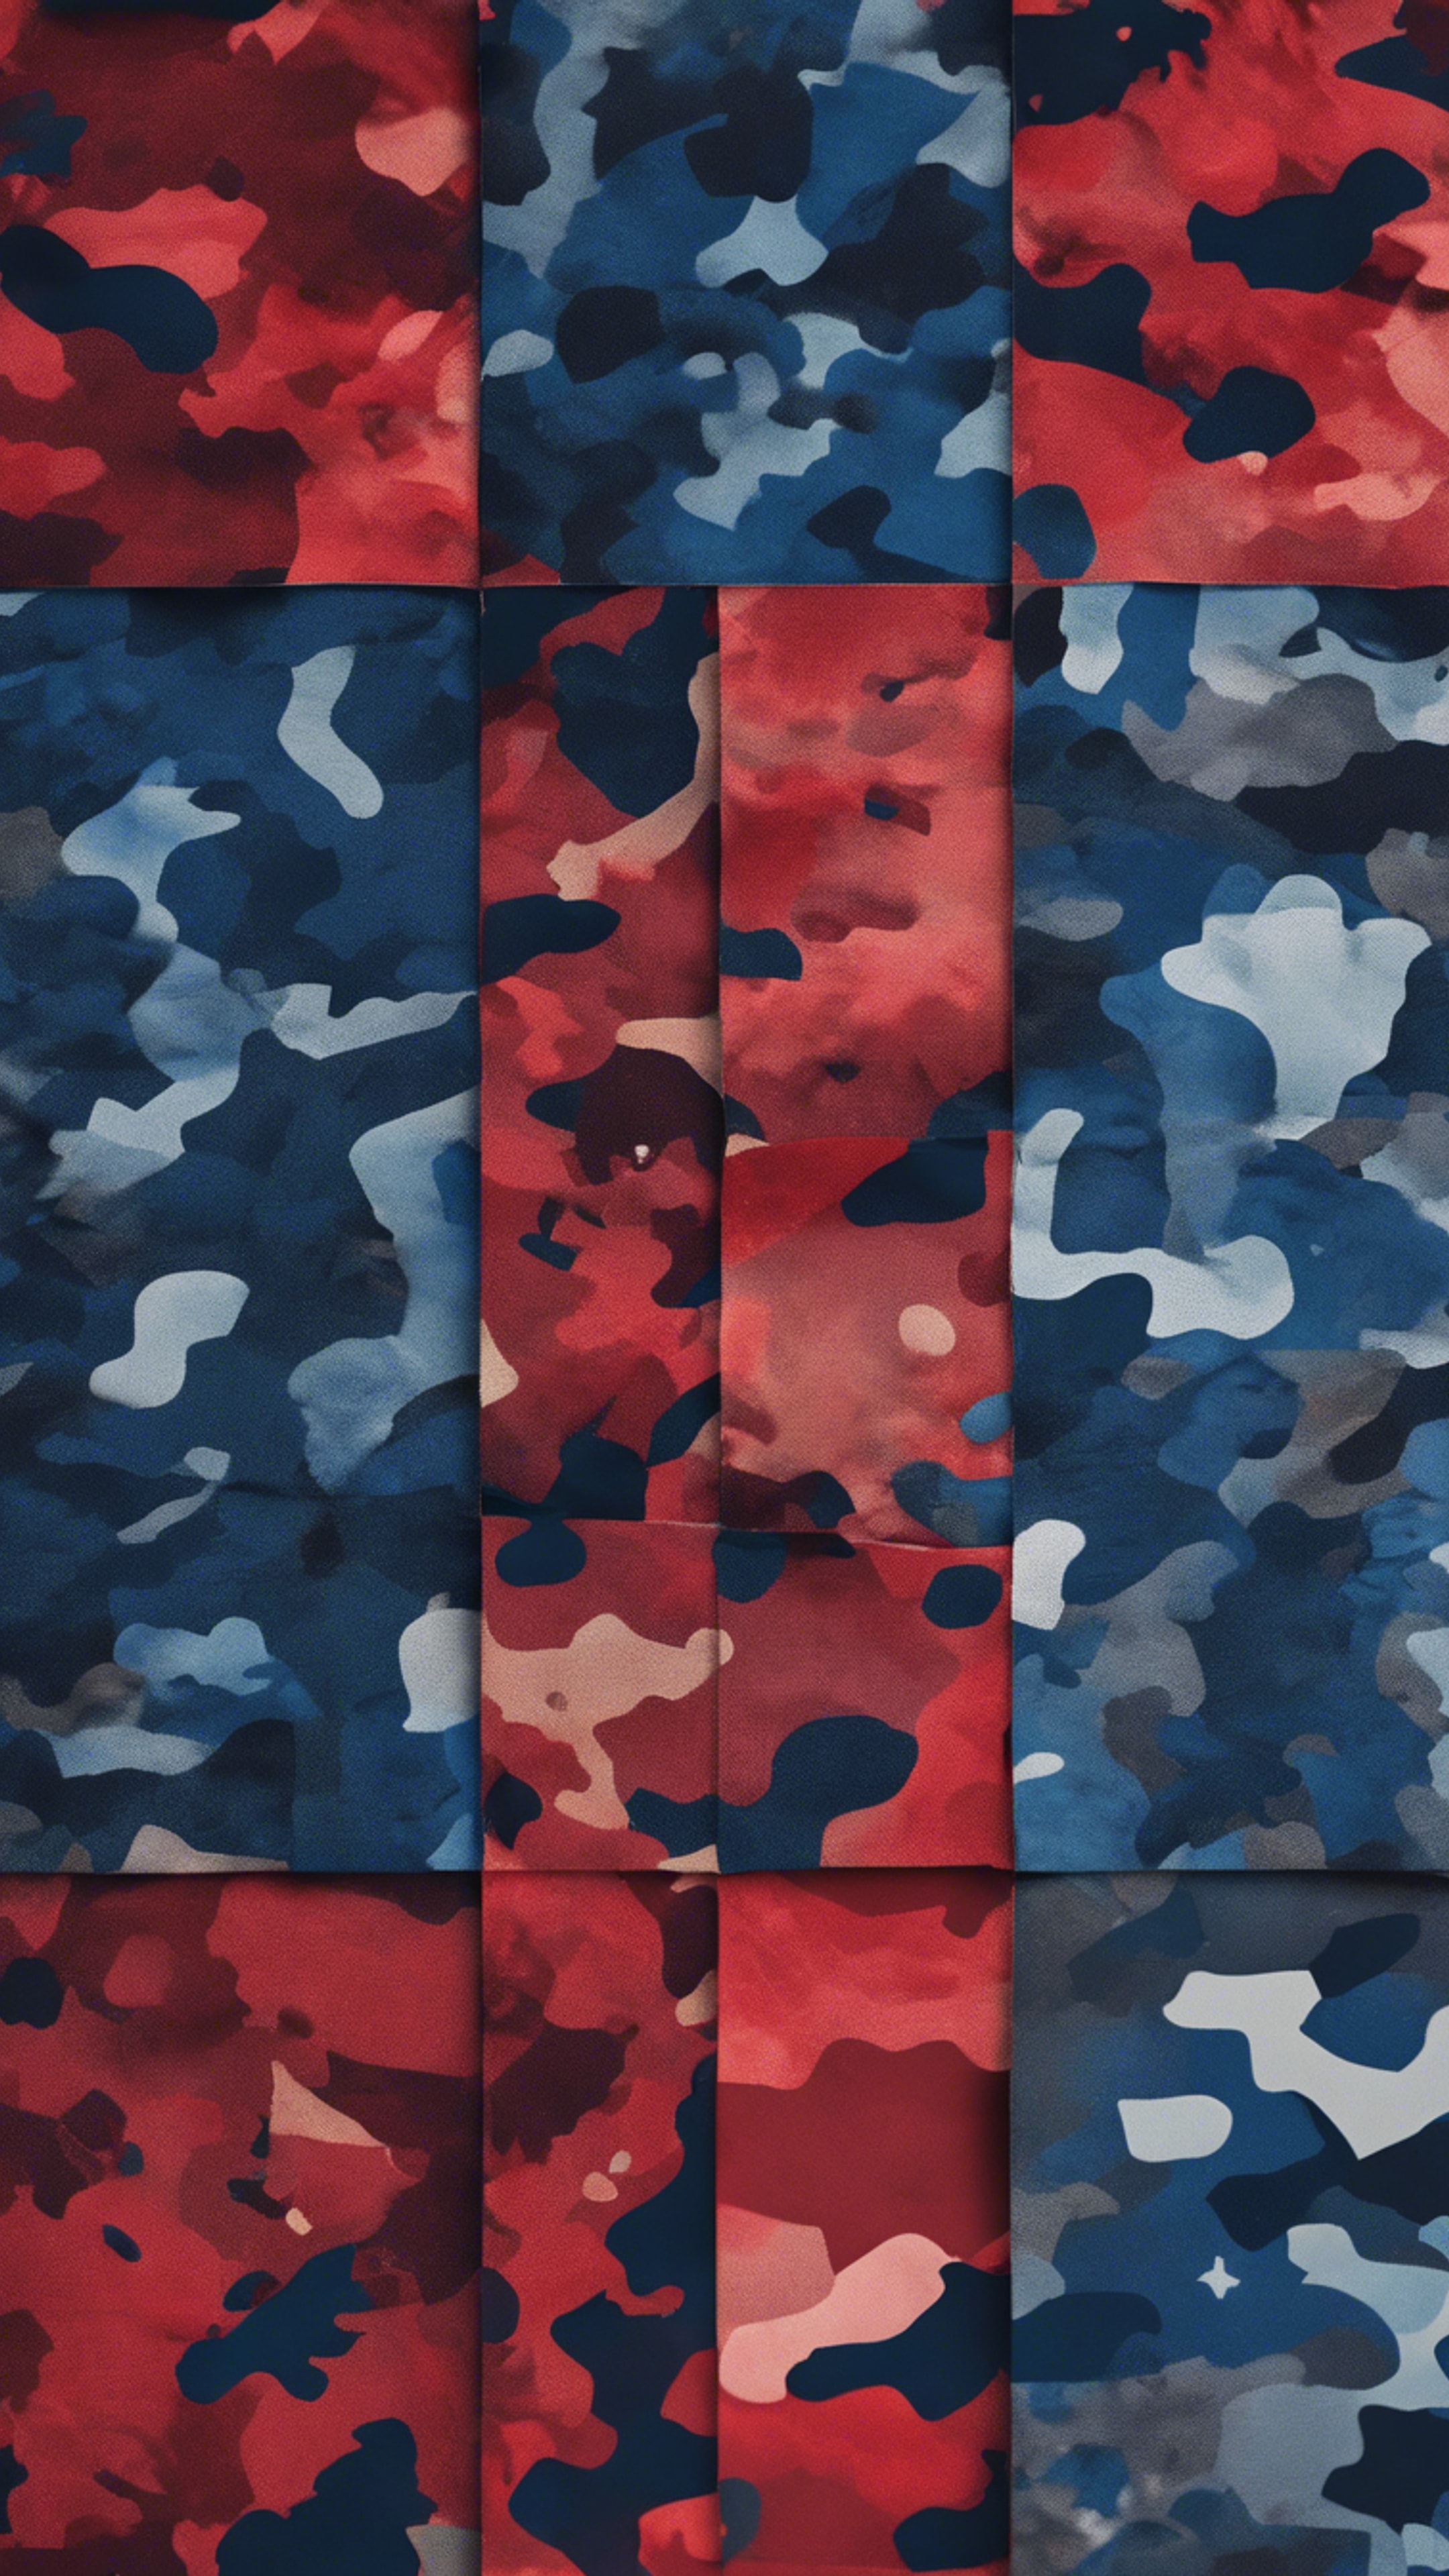 Wide patches of red and blue in a modernized camouflage pattern.壁紙[bf2d18a8e46c447ea6e3]